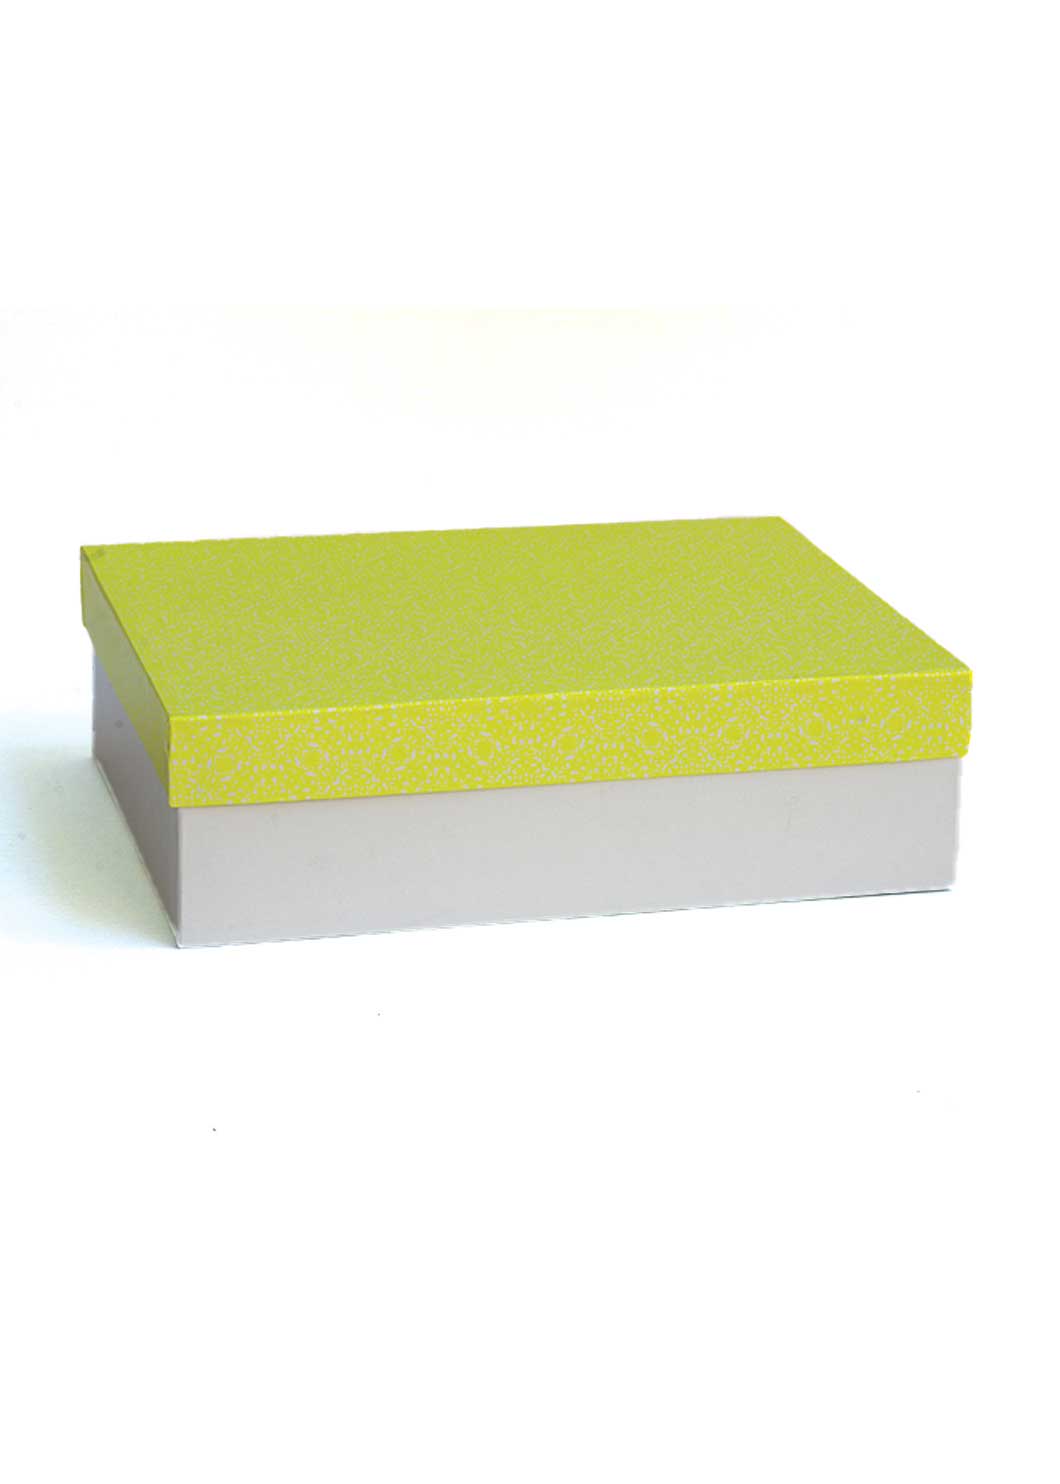 Floral Design Square Box With White Base For Multipurpose Packaging